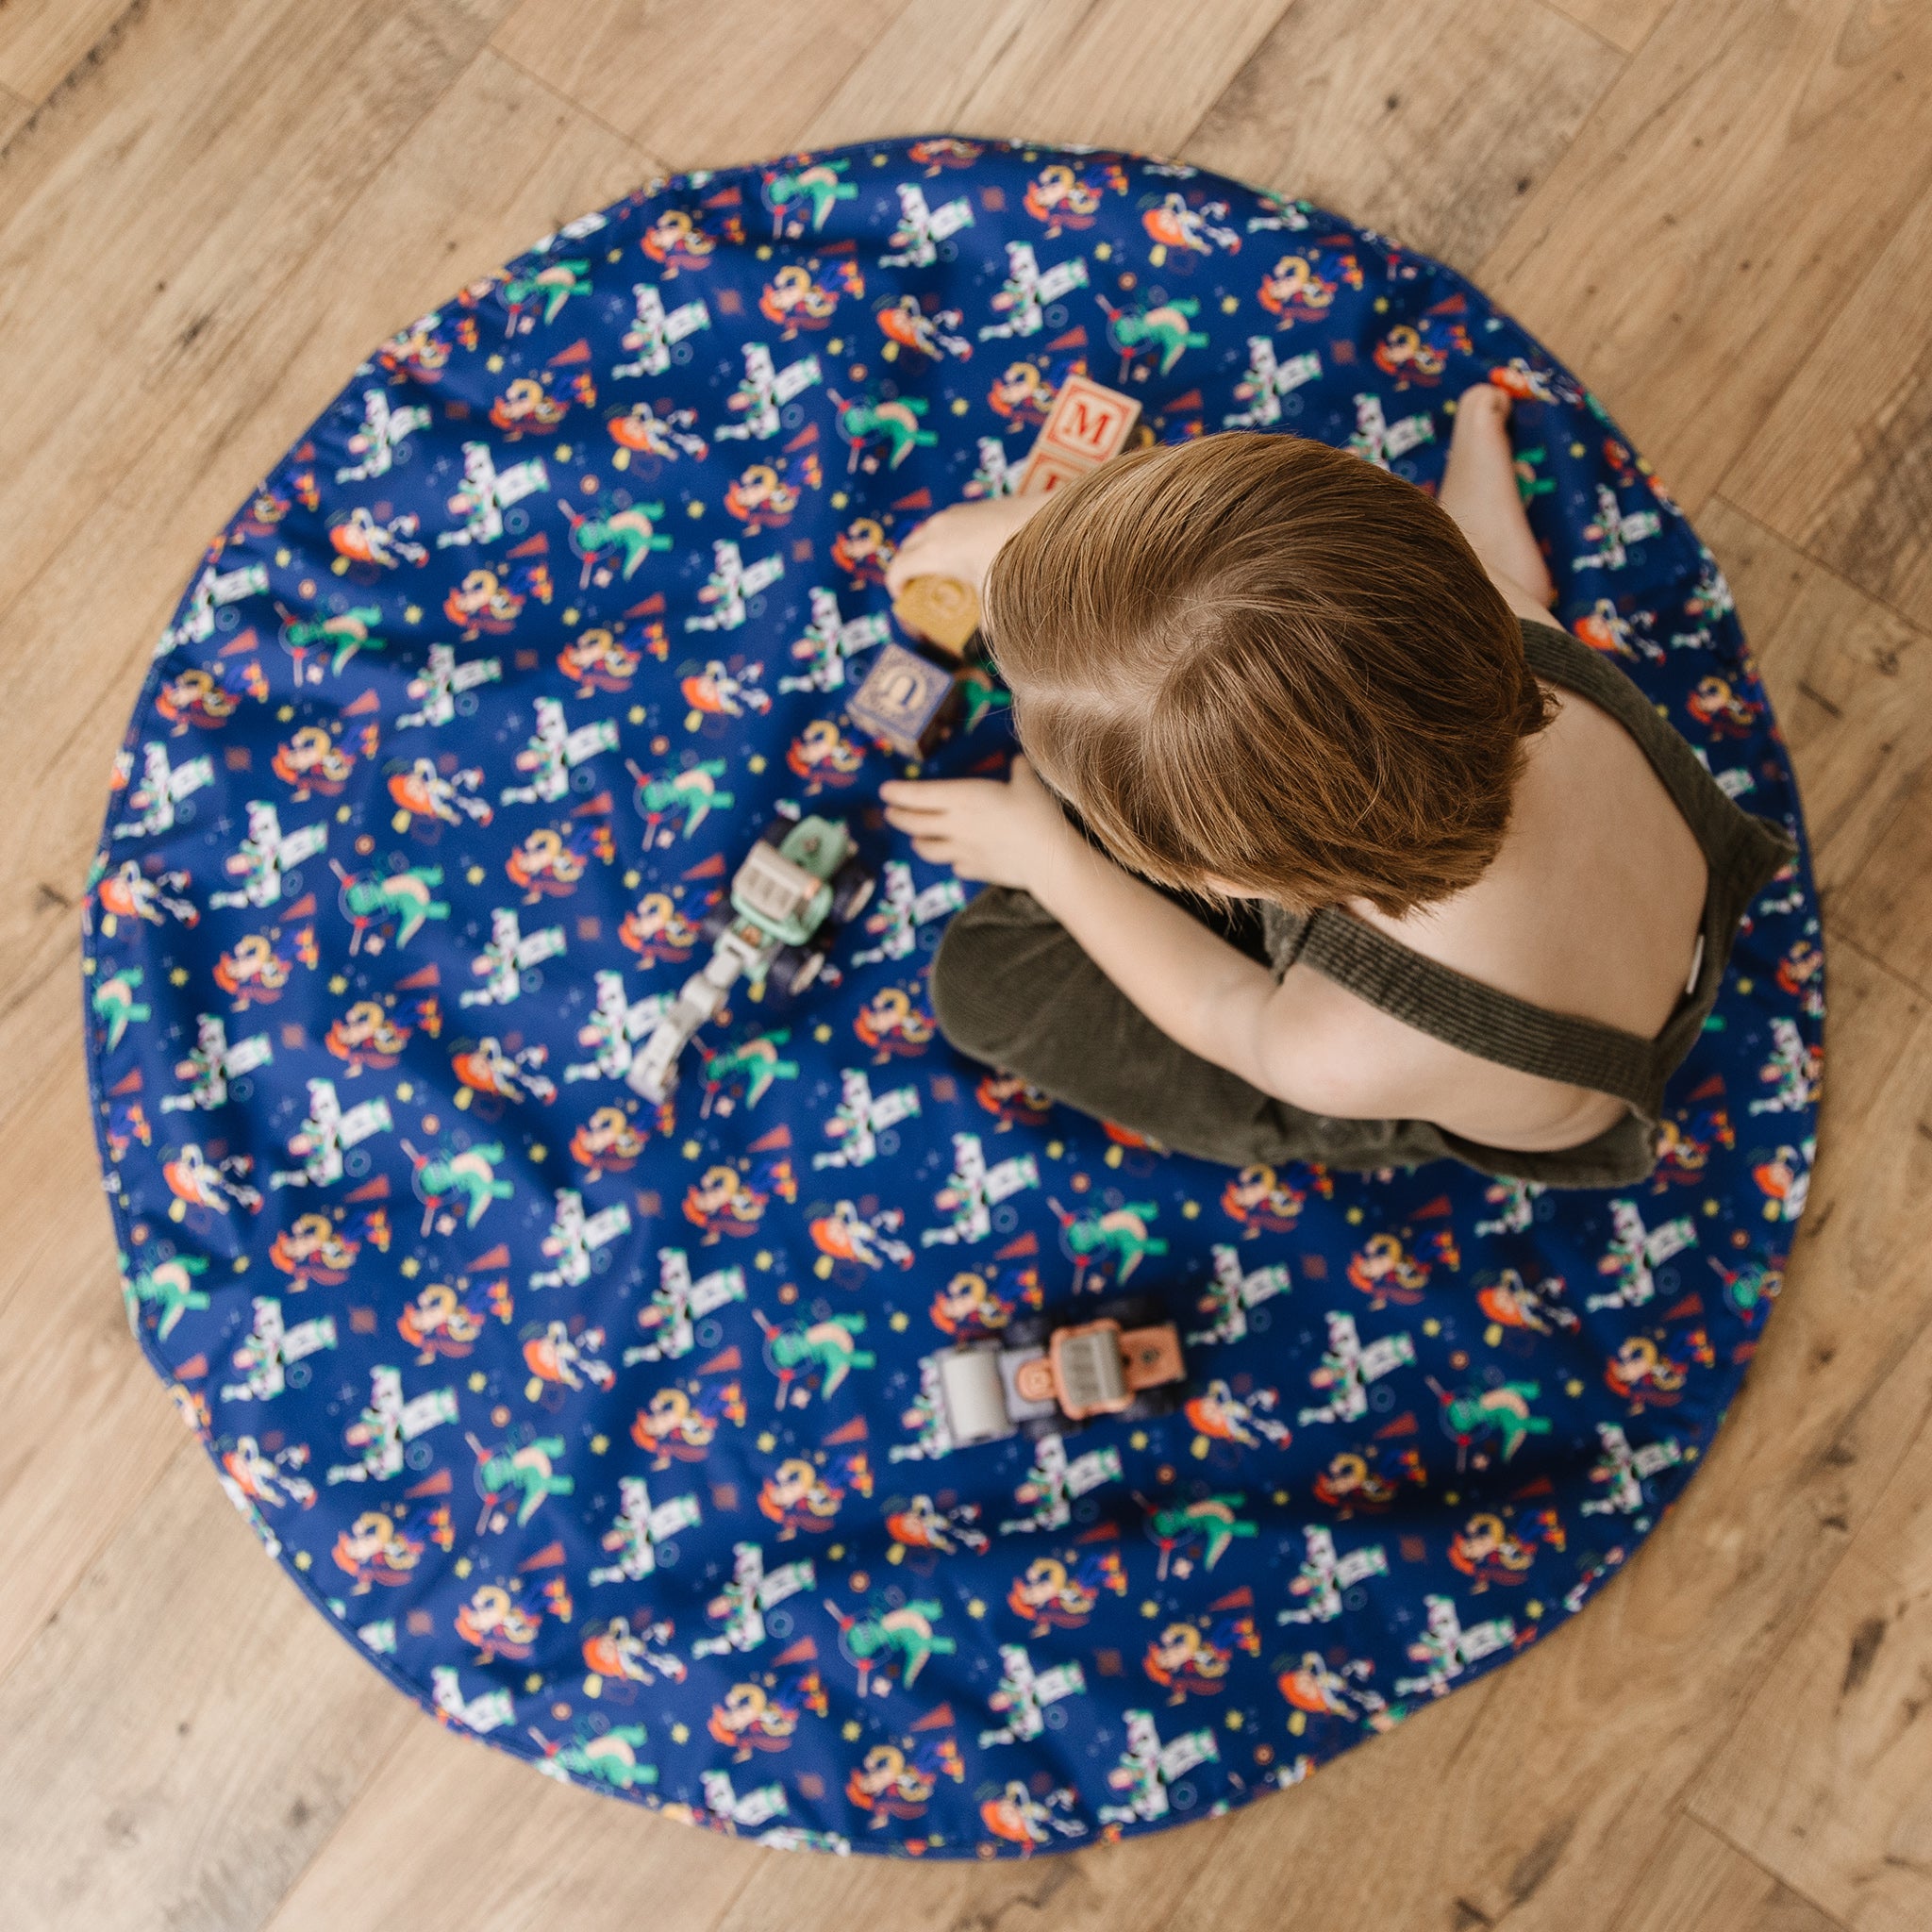  Featuring Woody, Buzz, and all their friends from Toy Story and Disney Pixar's Dr. B.F.F on a dark navy blue background, Toddler Play in Action Lifestyle Shot (Lightweight-Compact-Machine Washable-Play Mat).